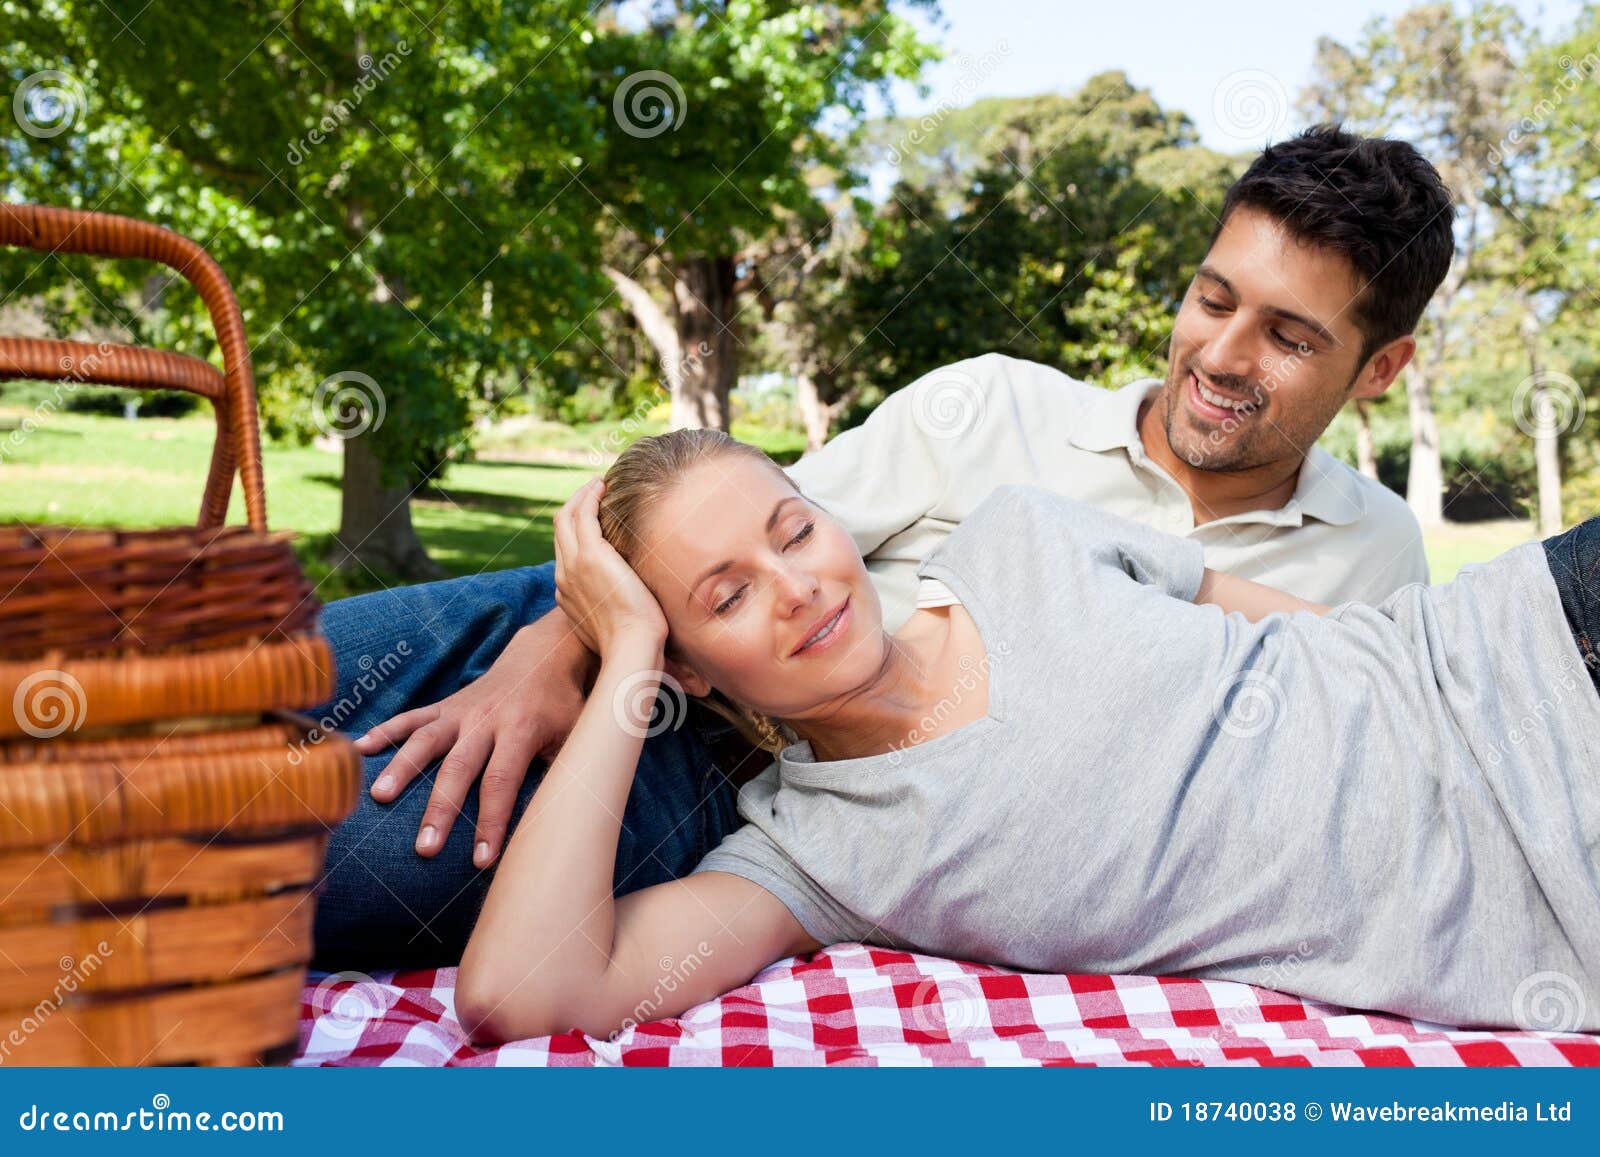 Couple Picnicking In The Park Stock Photo Image Of Couple Adult